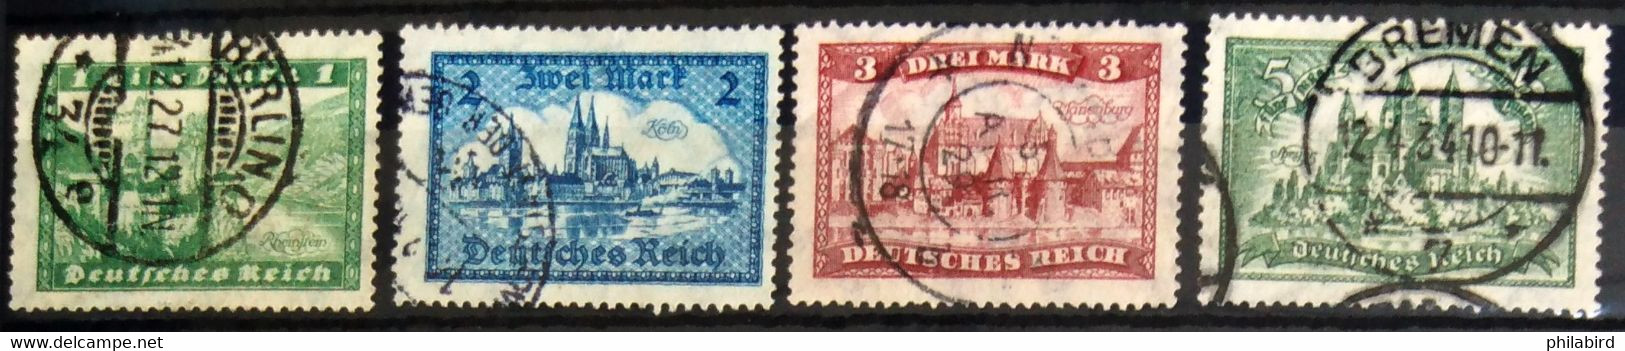 ALLEMAGNE - Empire                      N° 355/358                        OBLITERE - Used Stamps